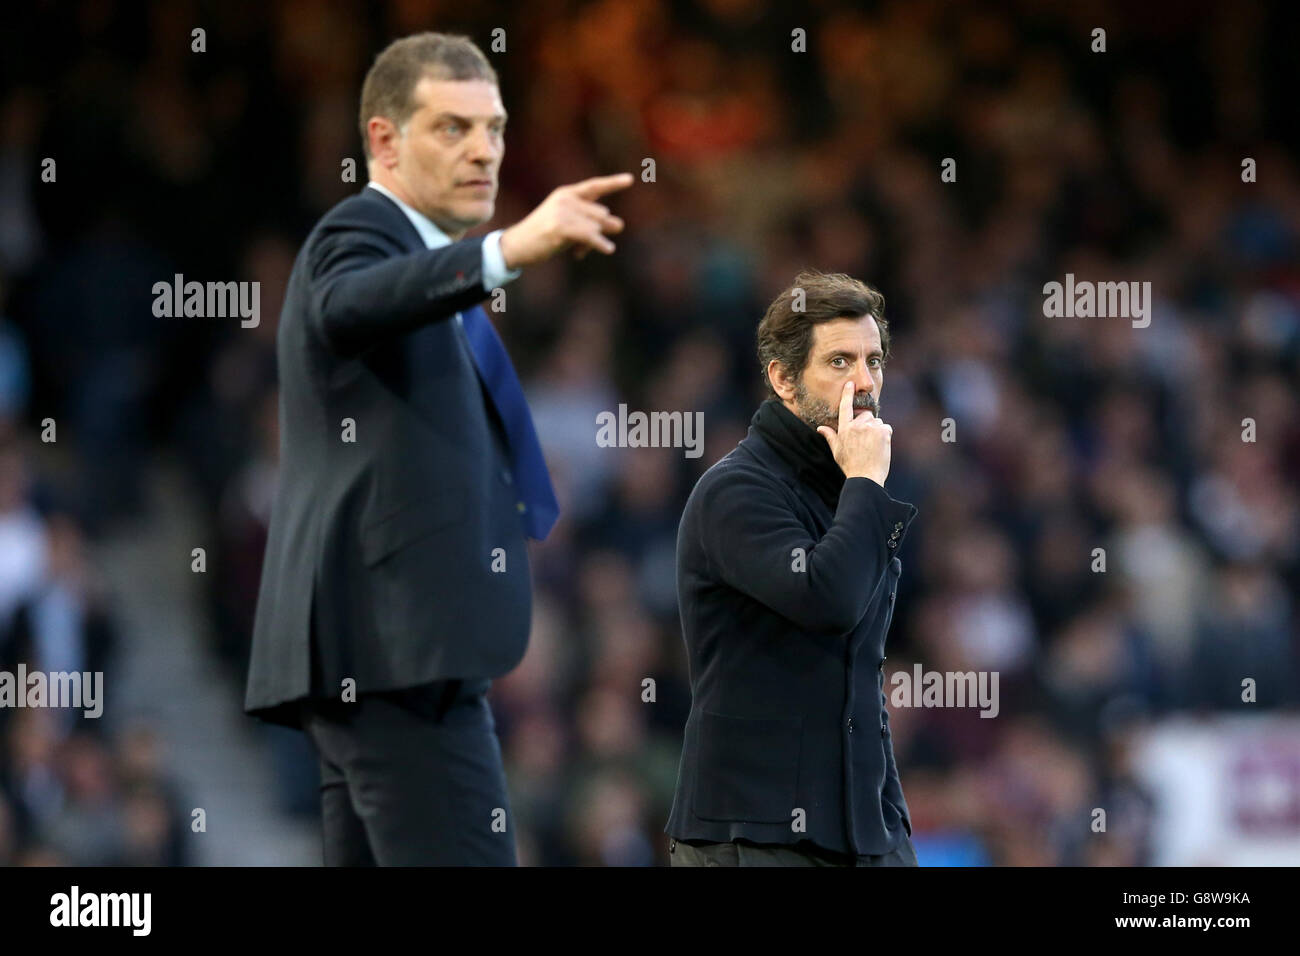 Watford manager Quique Sanchez Flores (right) scratches his nose and West Ham United manager Slaven Bilic (left) gestures on the touchline Stock Photo